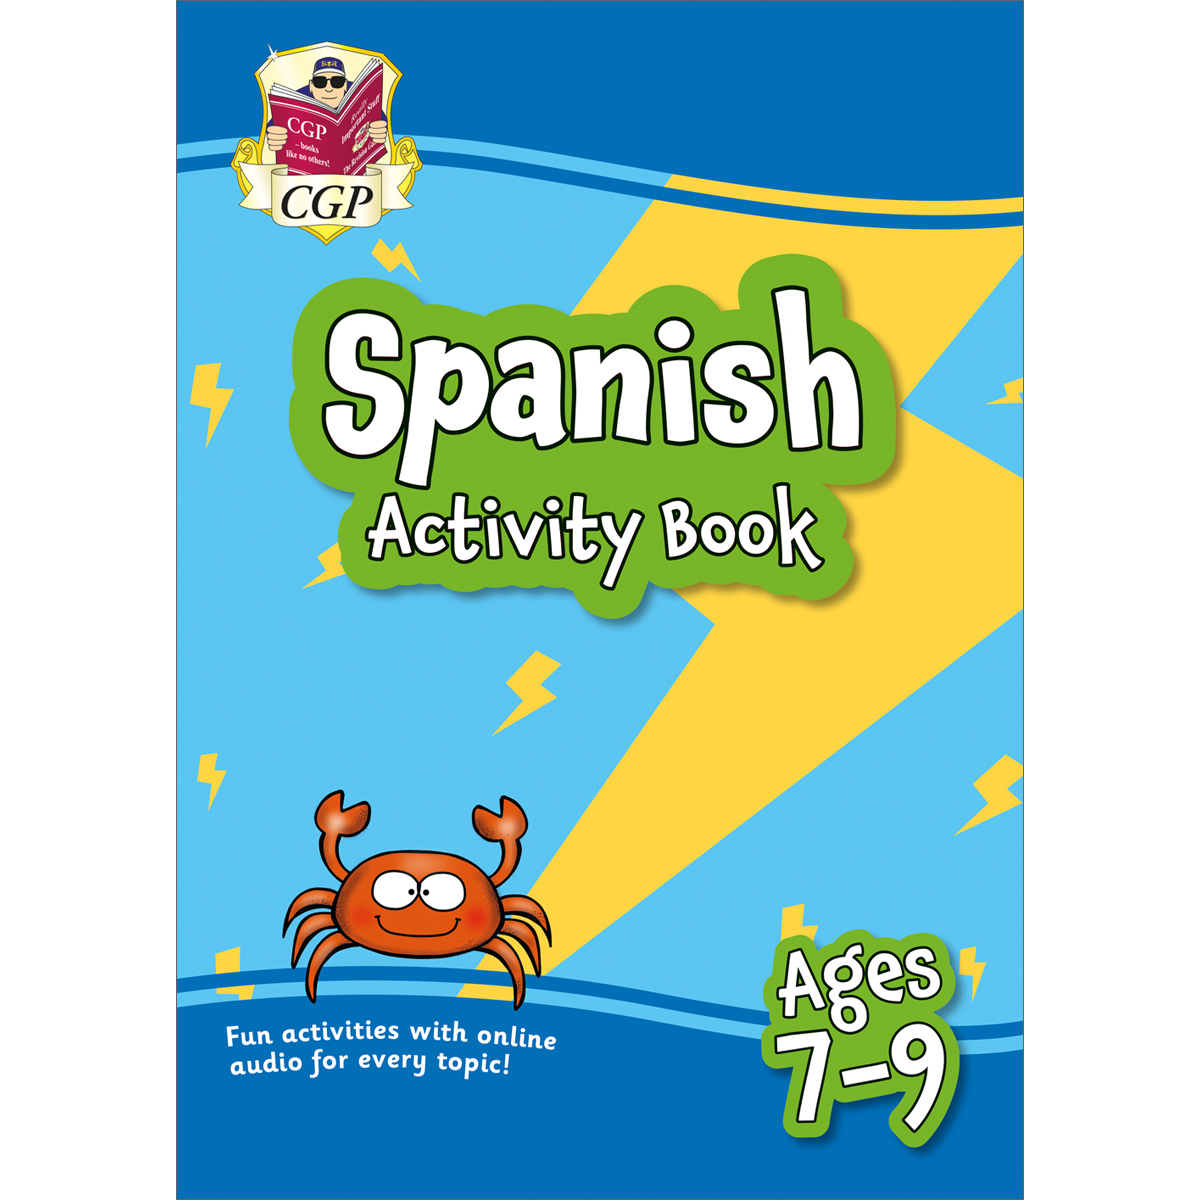 CGP Spanish Activity Book: Ages 7-9